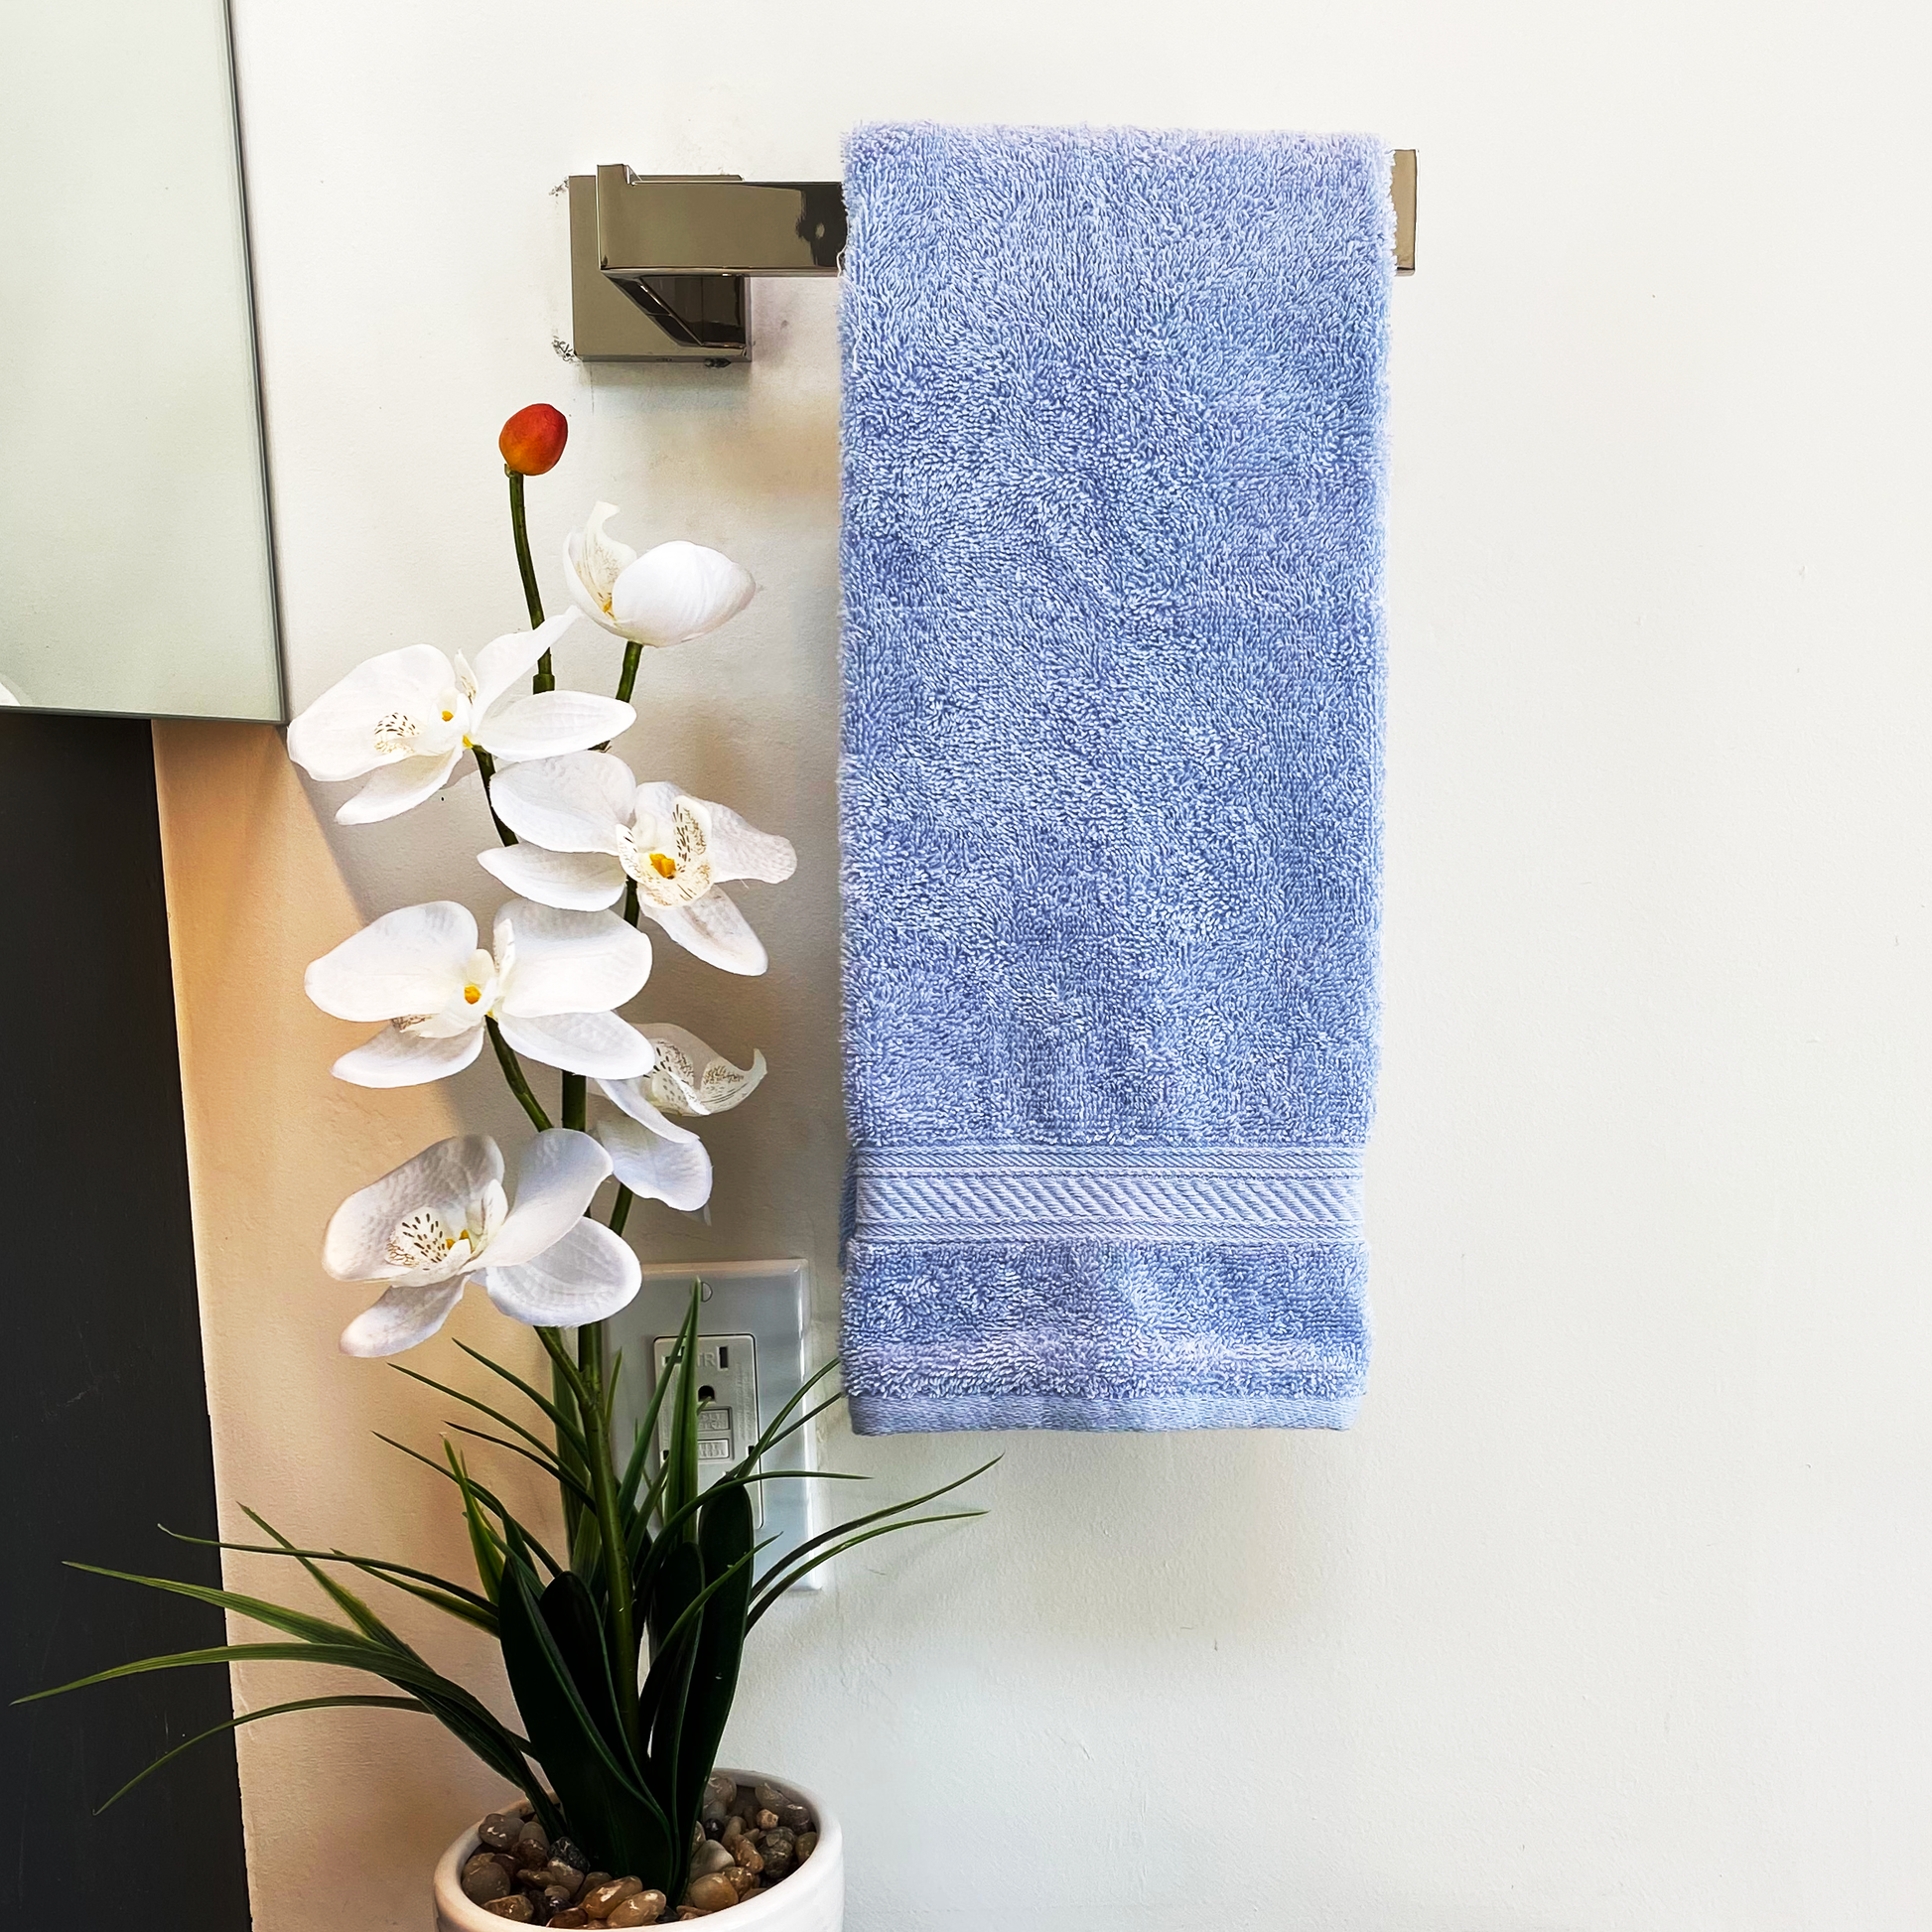 TOWELS BY GUS Lake Tahoe Towel Collection - Made in the USA Luxury Classic Towels